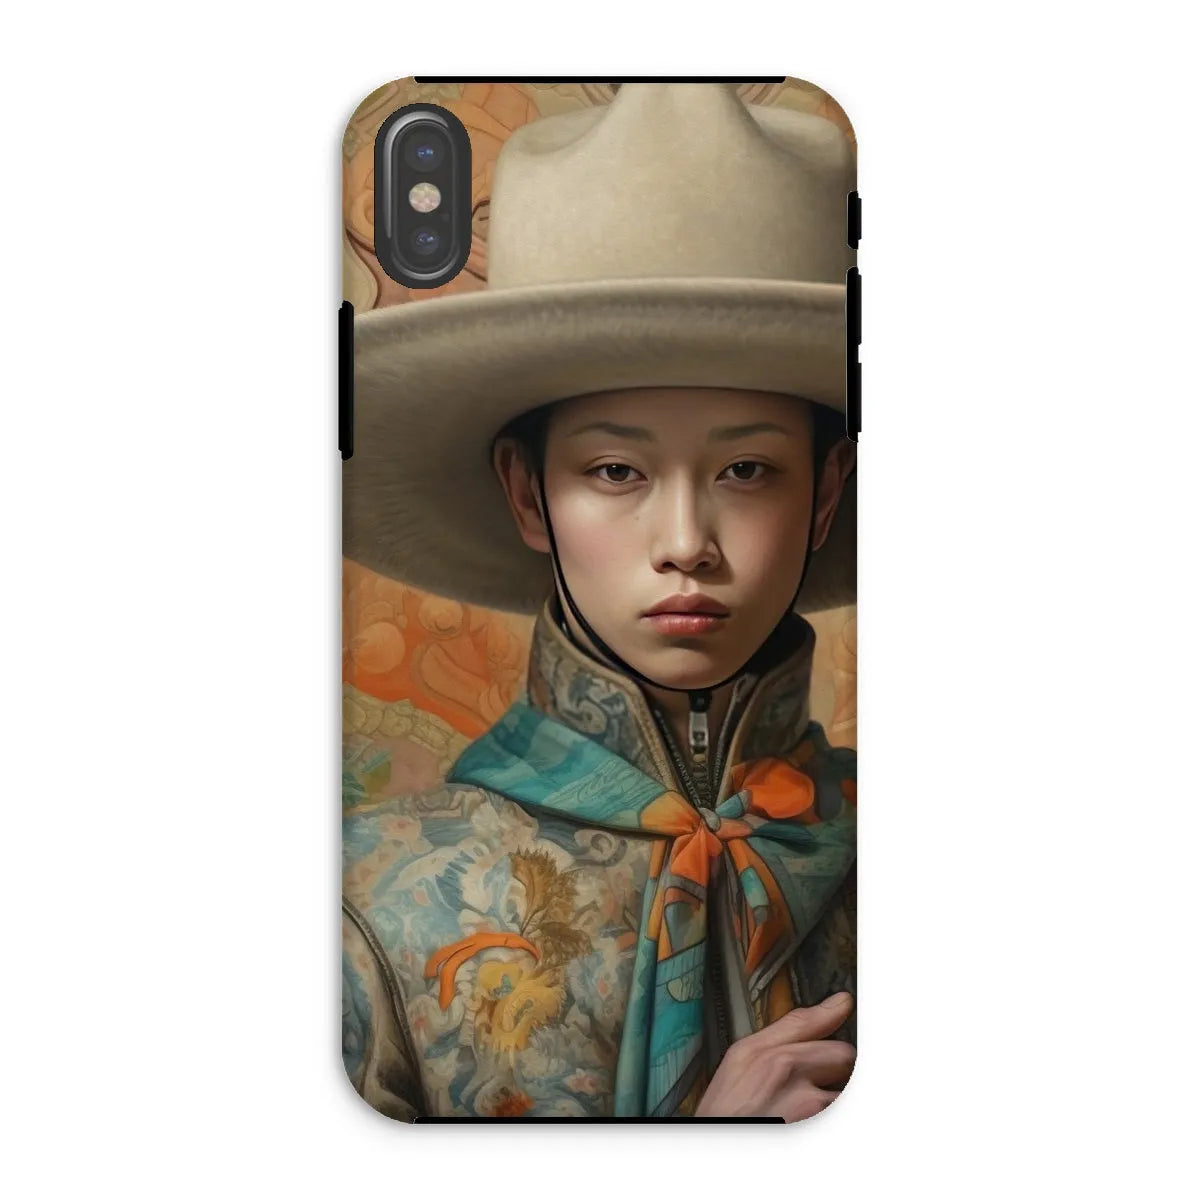 Xiang - Gaysian Chinese Cowboy Aesthetic Art Phone Case - Iphone Xs / Matte - Mobile Phone Cases - Aesthetic Art